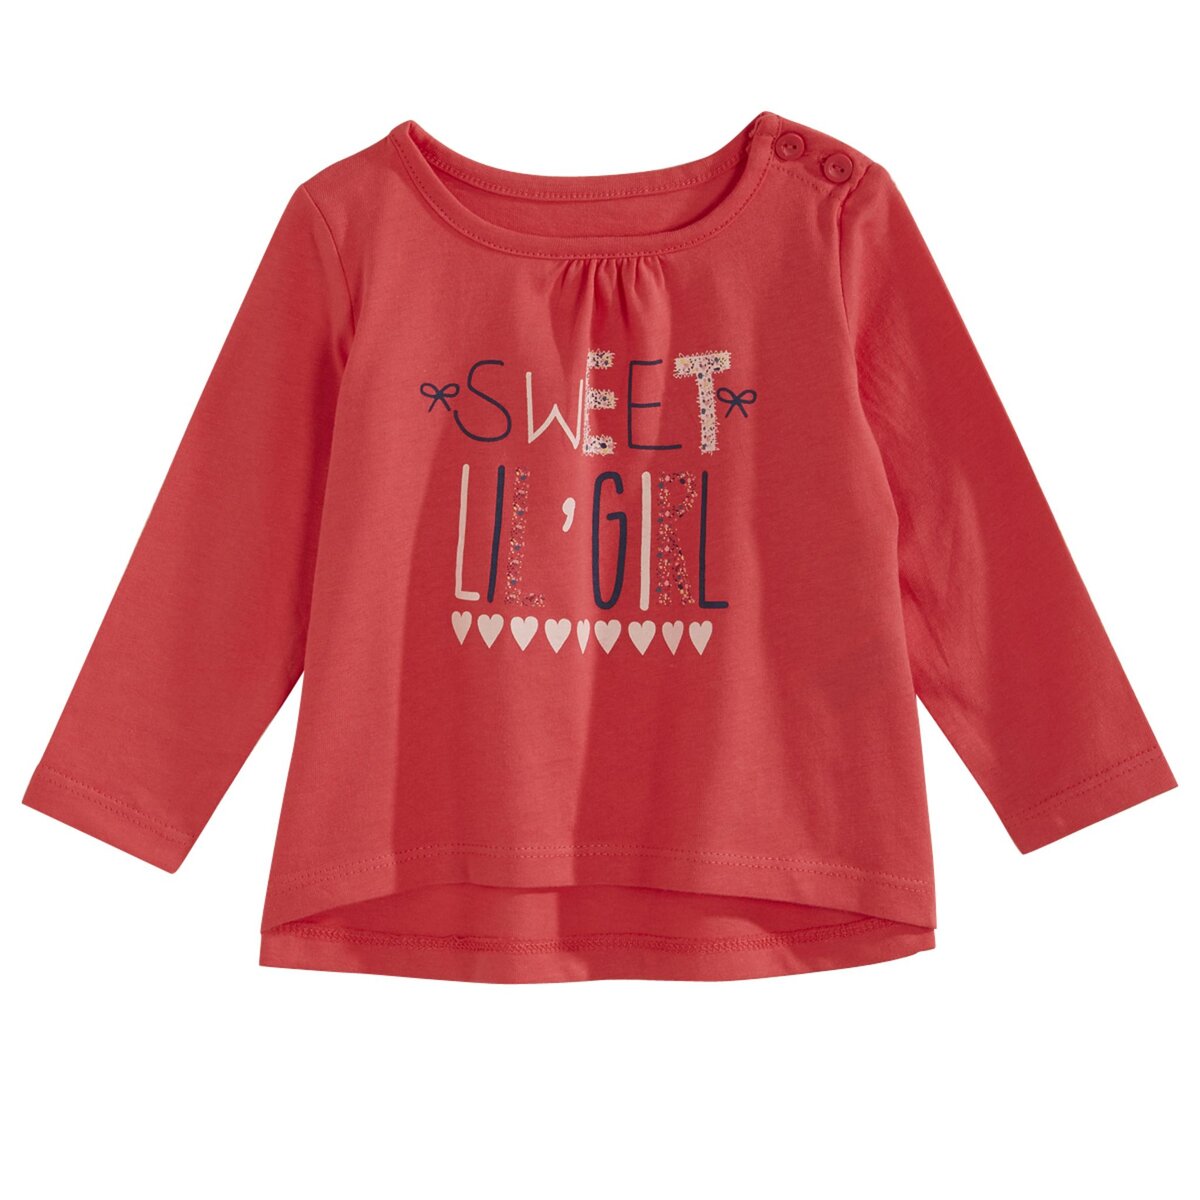 IN EXTENSO Tee-shirt manches longues bébé fille